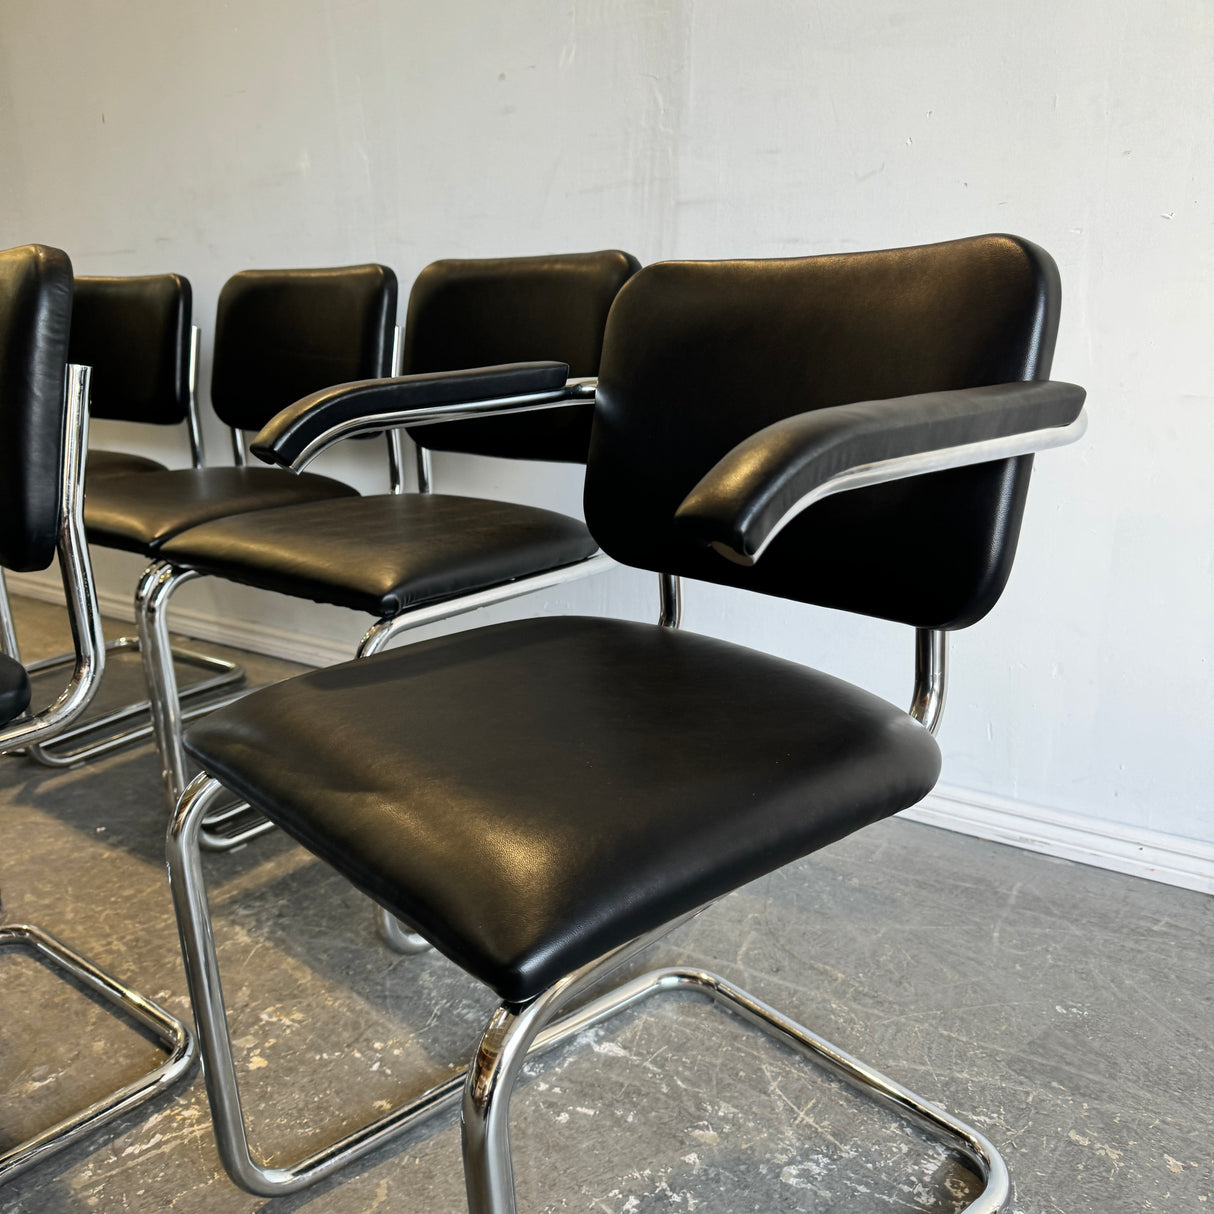 Authentic! Knoll Marcel Breuer Set of 8 Leather Cesca Chairs